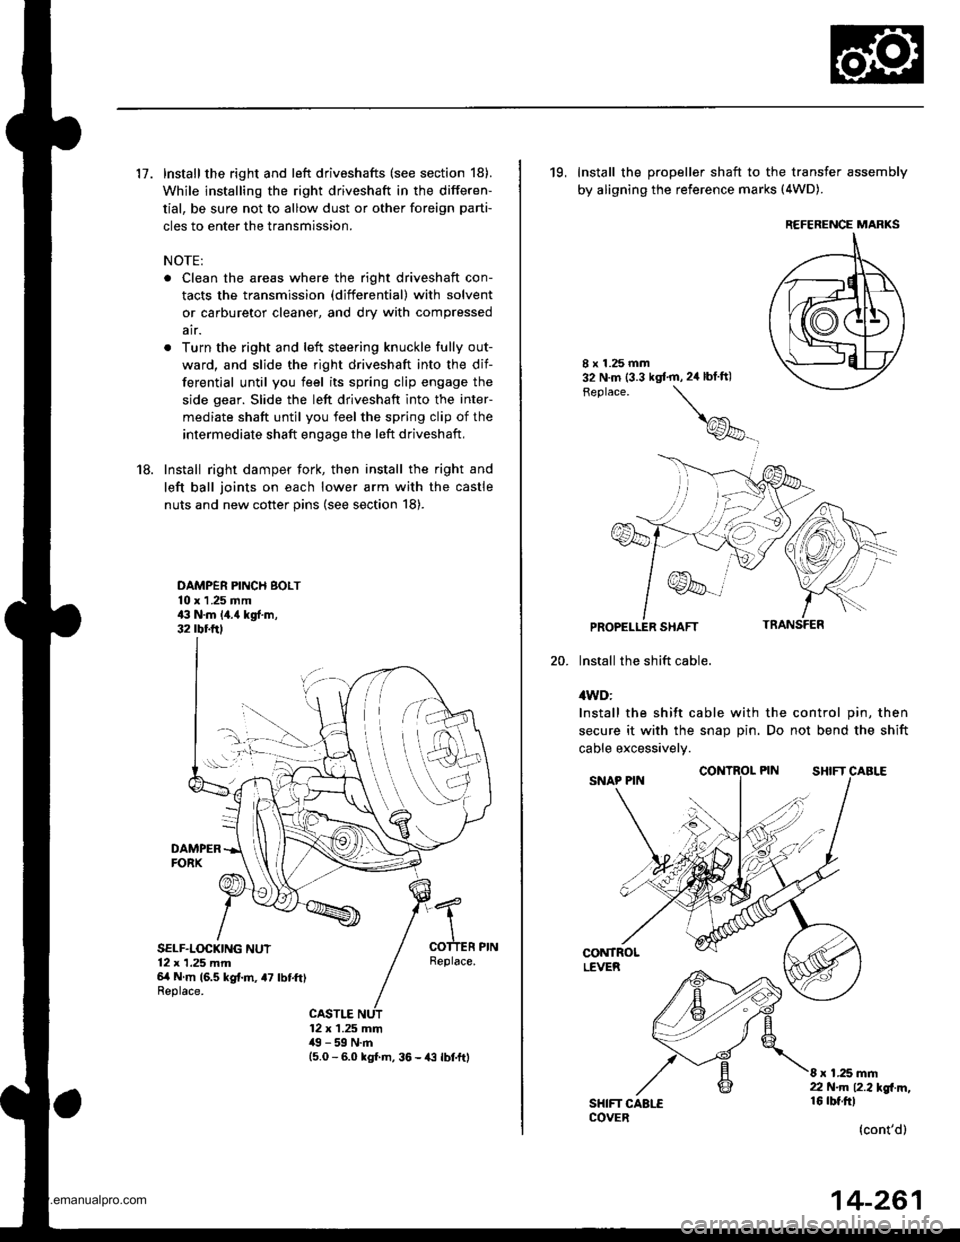 HONDA CR-V 1998 RD1-RD3 / 1.G Workshop Manual 
17. Install the right and left driveshafts (see section 18).
While installing the right driveshaft in the differen-
tial, be sure not to allow dust or other foreign parti-
cles to enter the transmiss